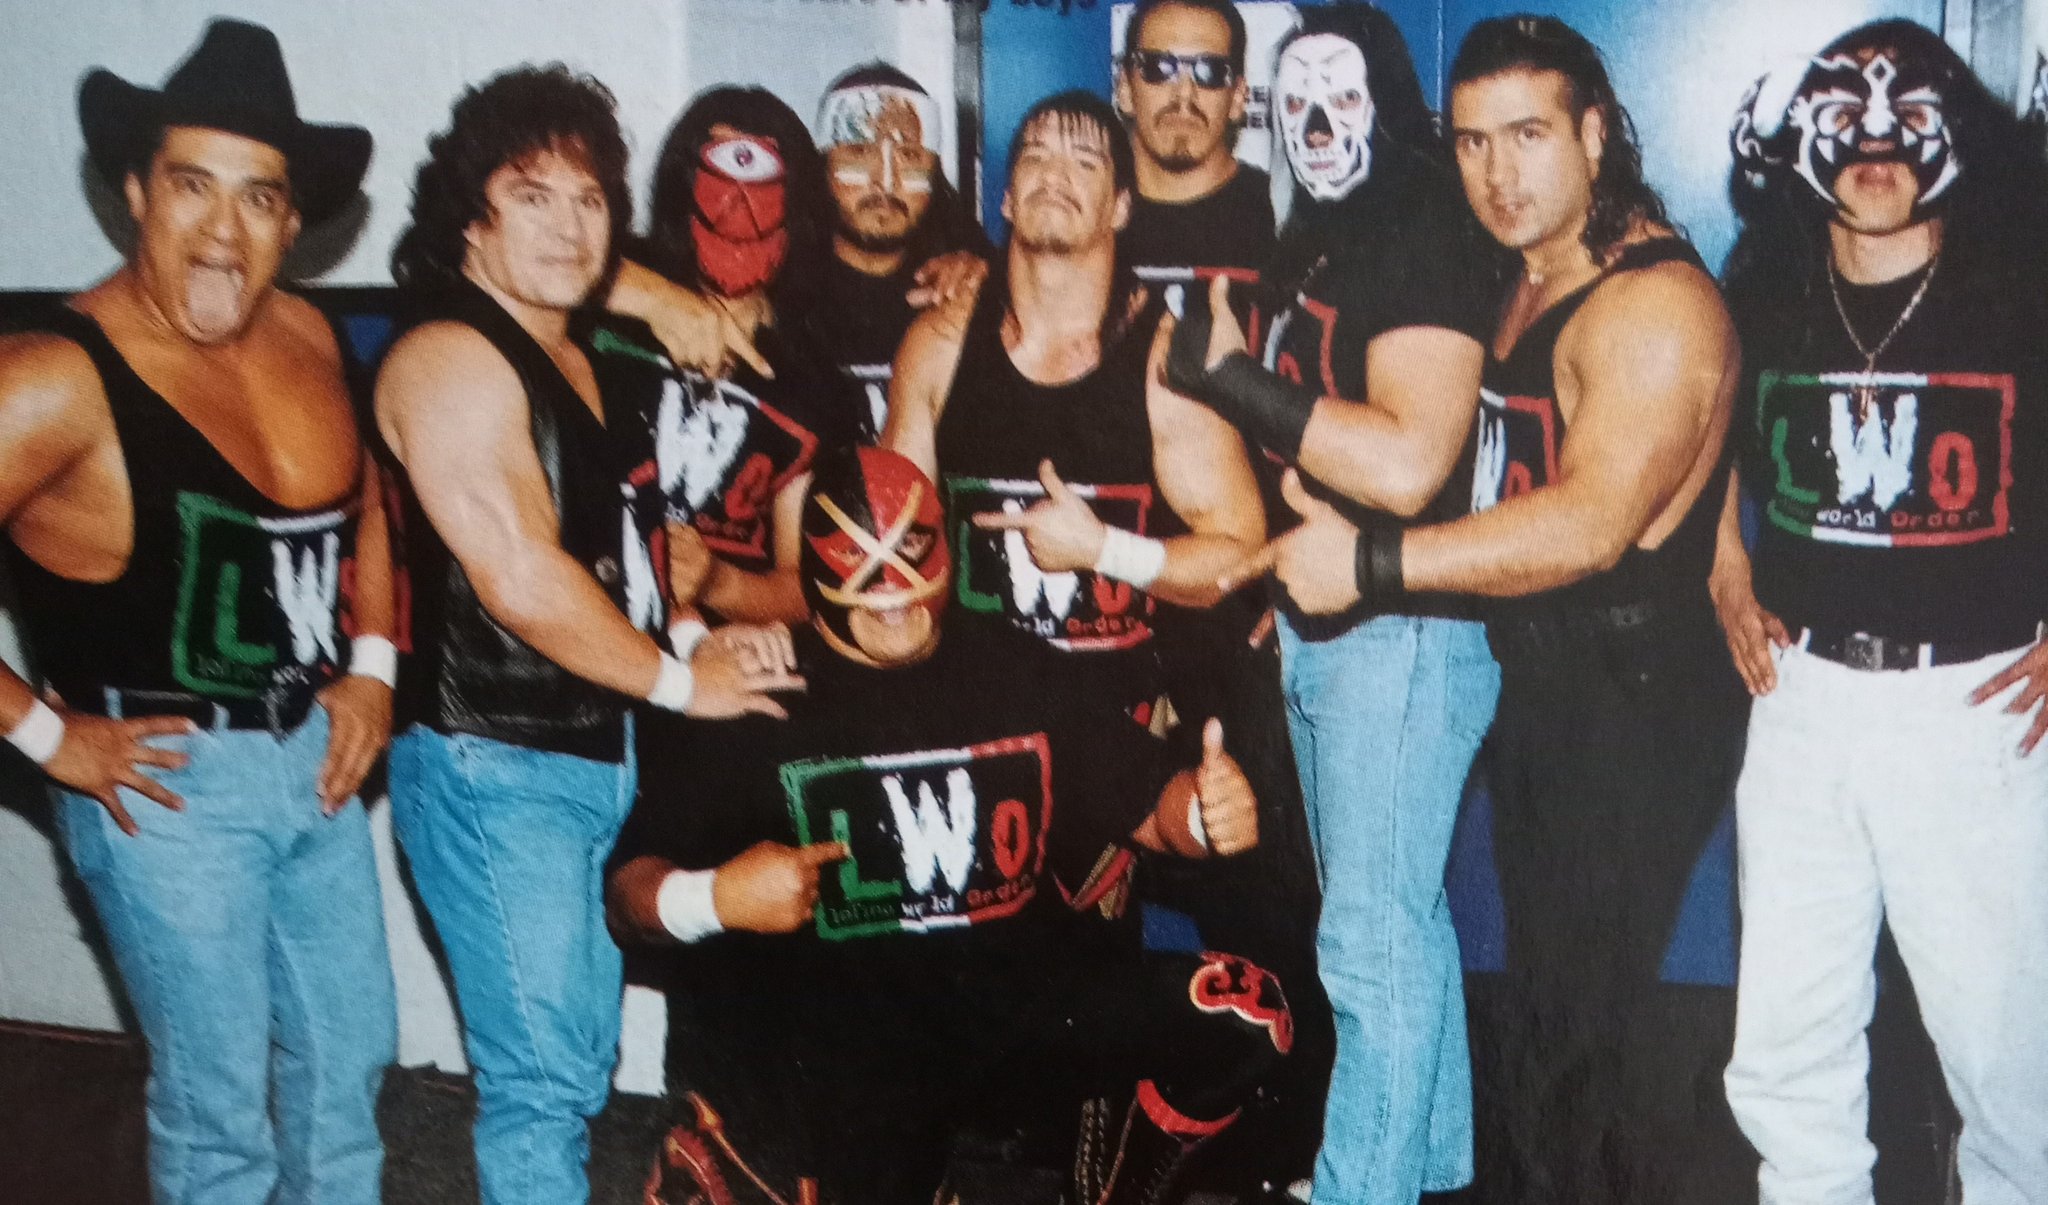 Rasslin' History 101 on Twitter: "Eddie Guerrero and his Latino World Order back in late-1998 https://t.co/a2DObsGgfN" / Twitter